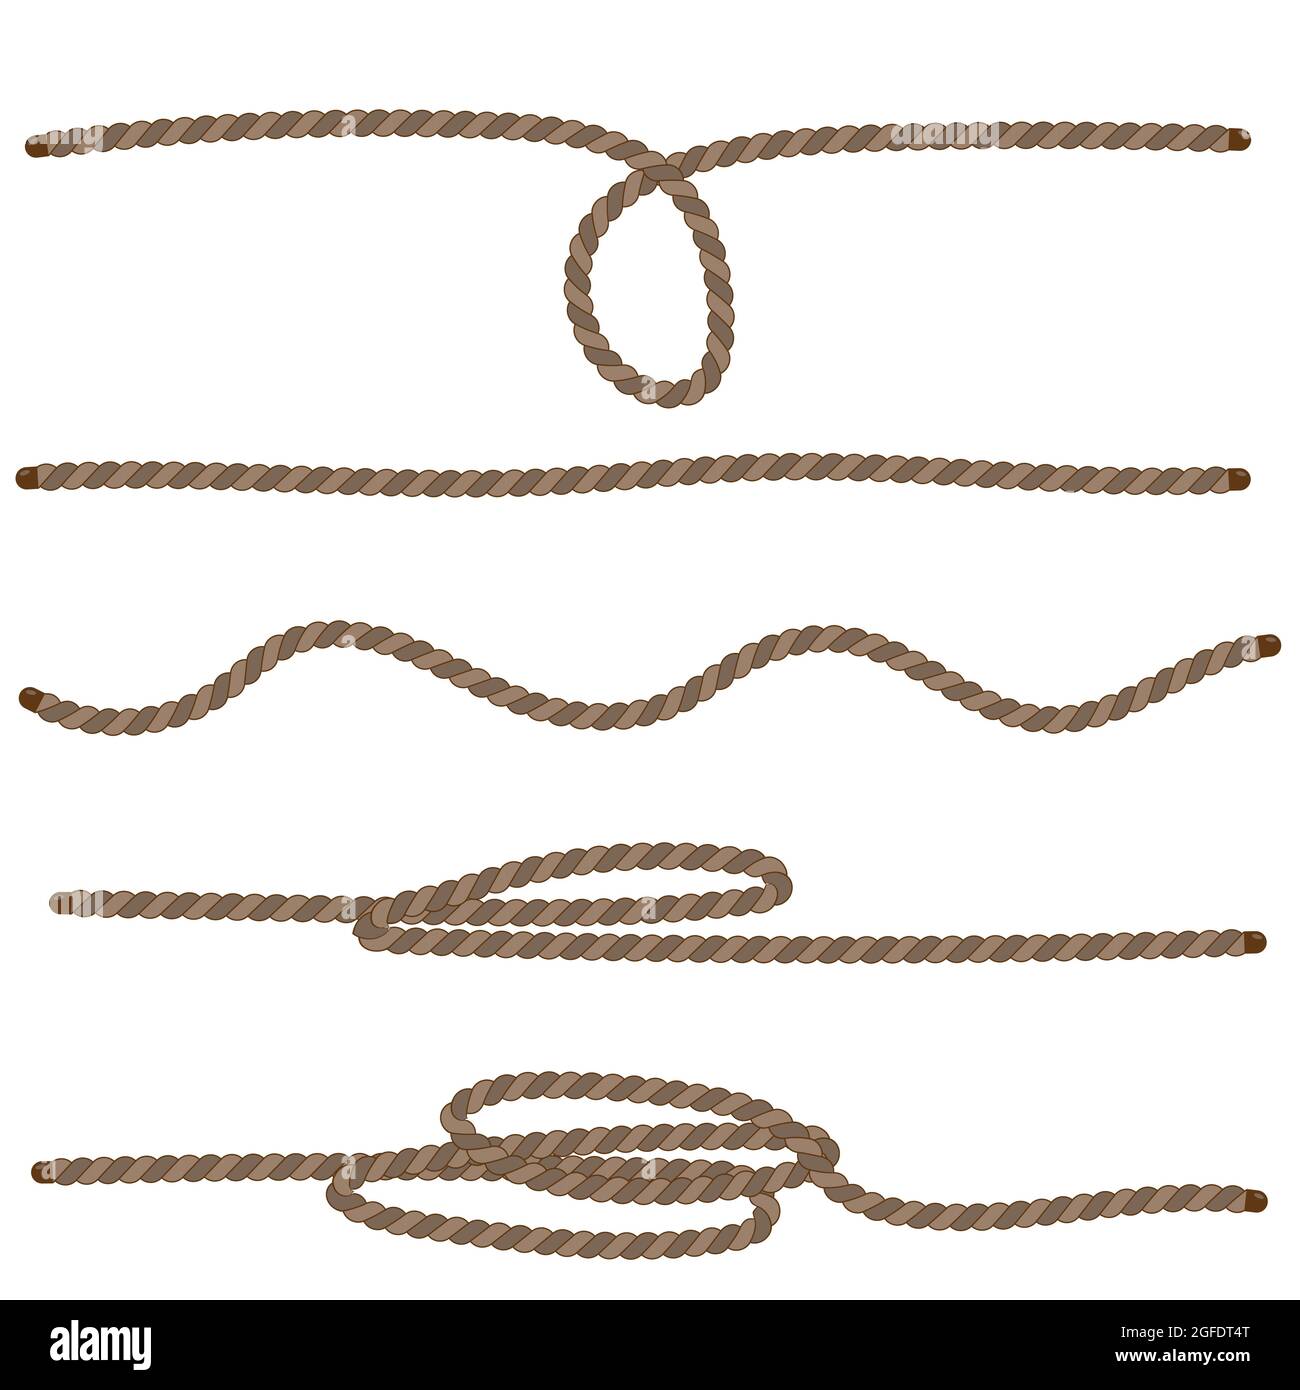 Braun natural jute rope set vector illustration. Twine collection